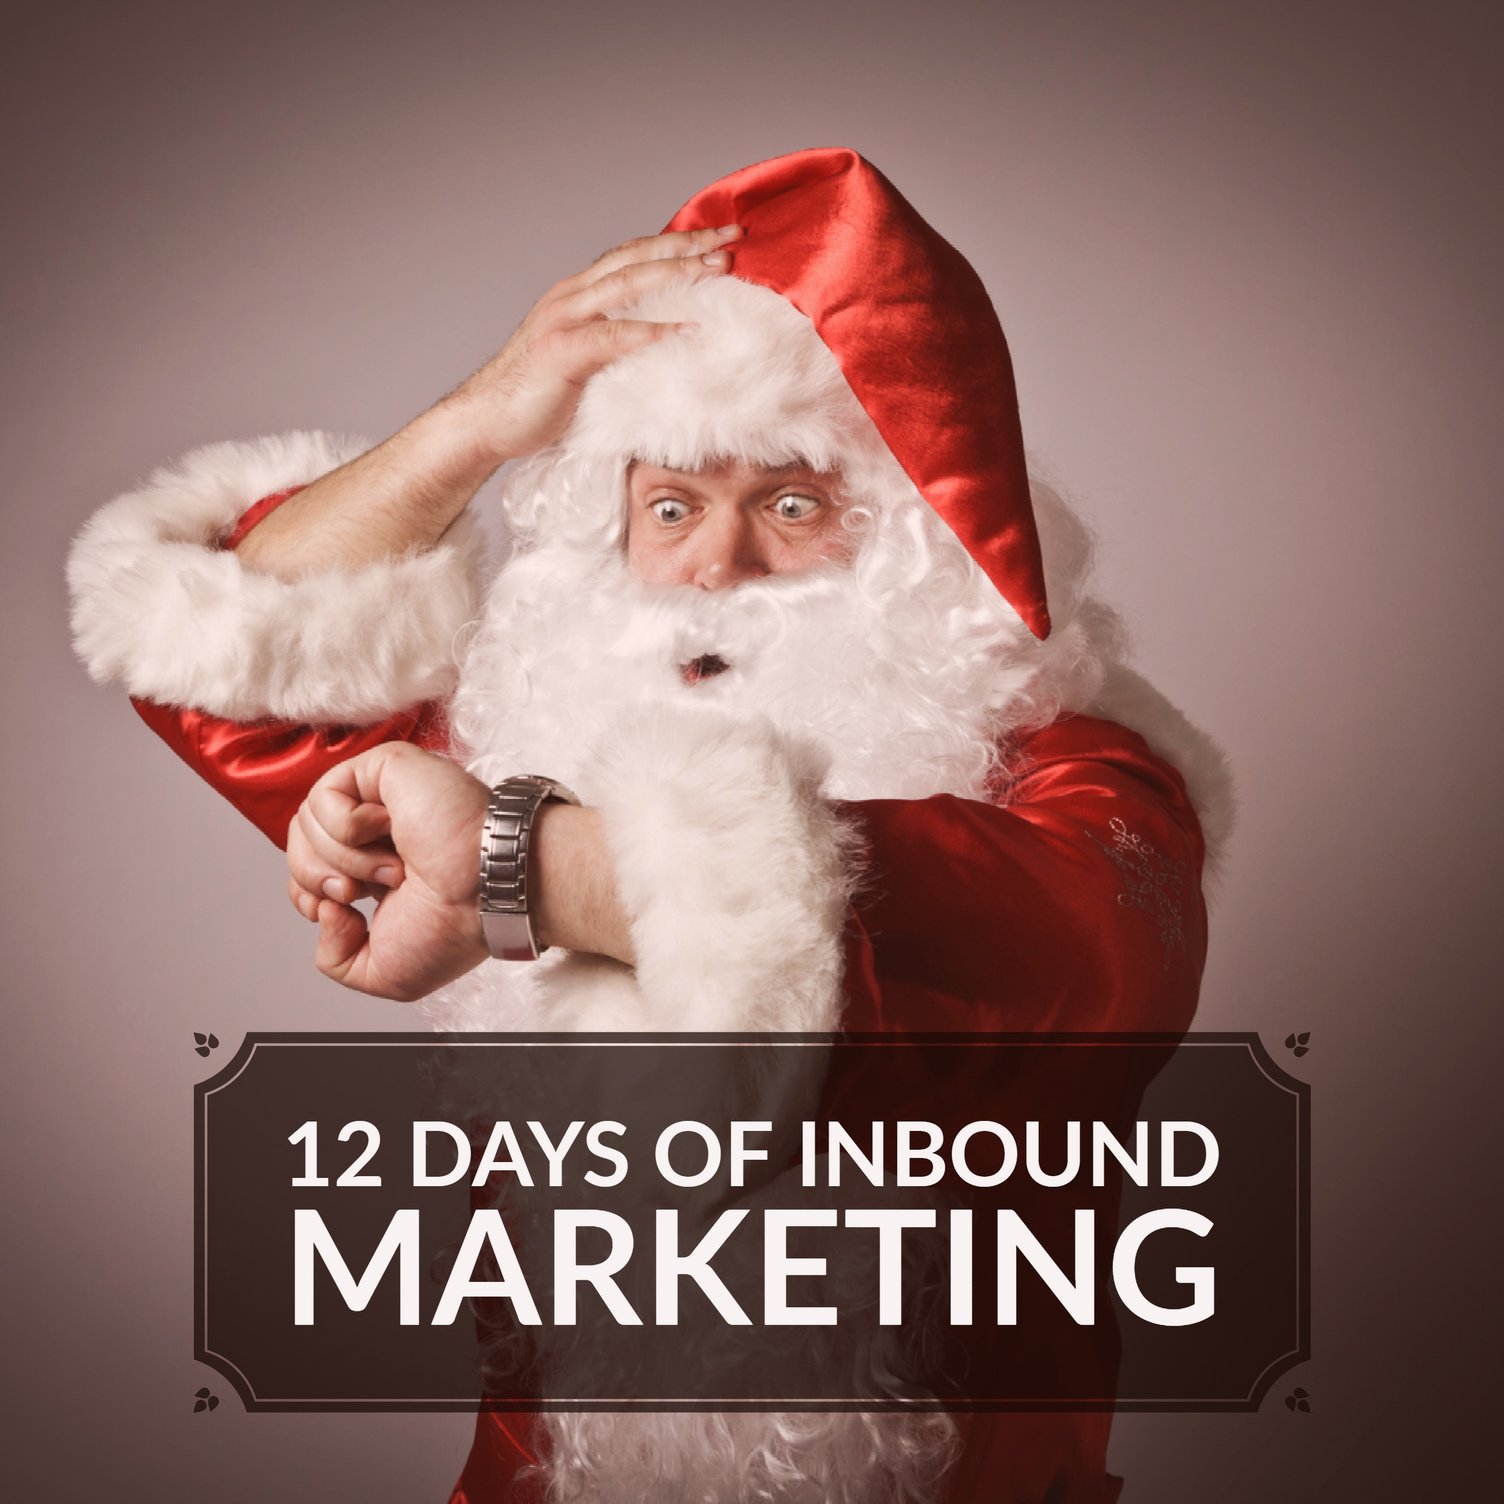 inbound marketing tips for christmas